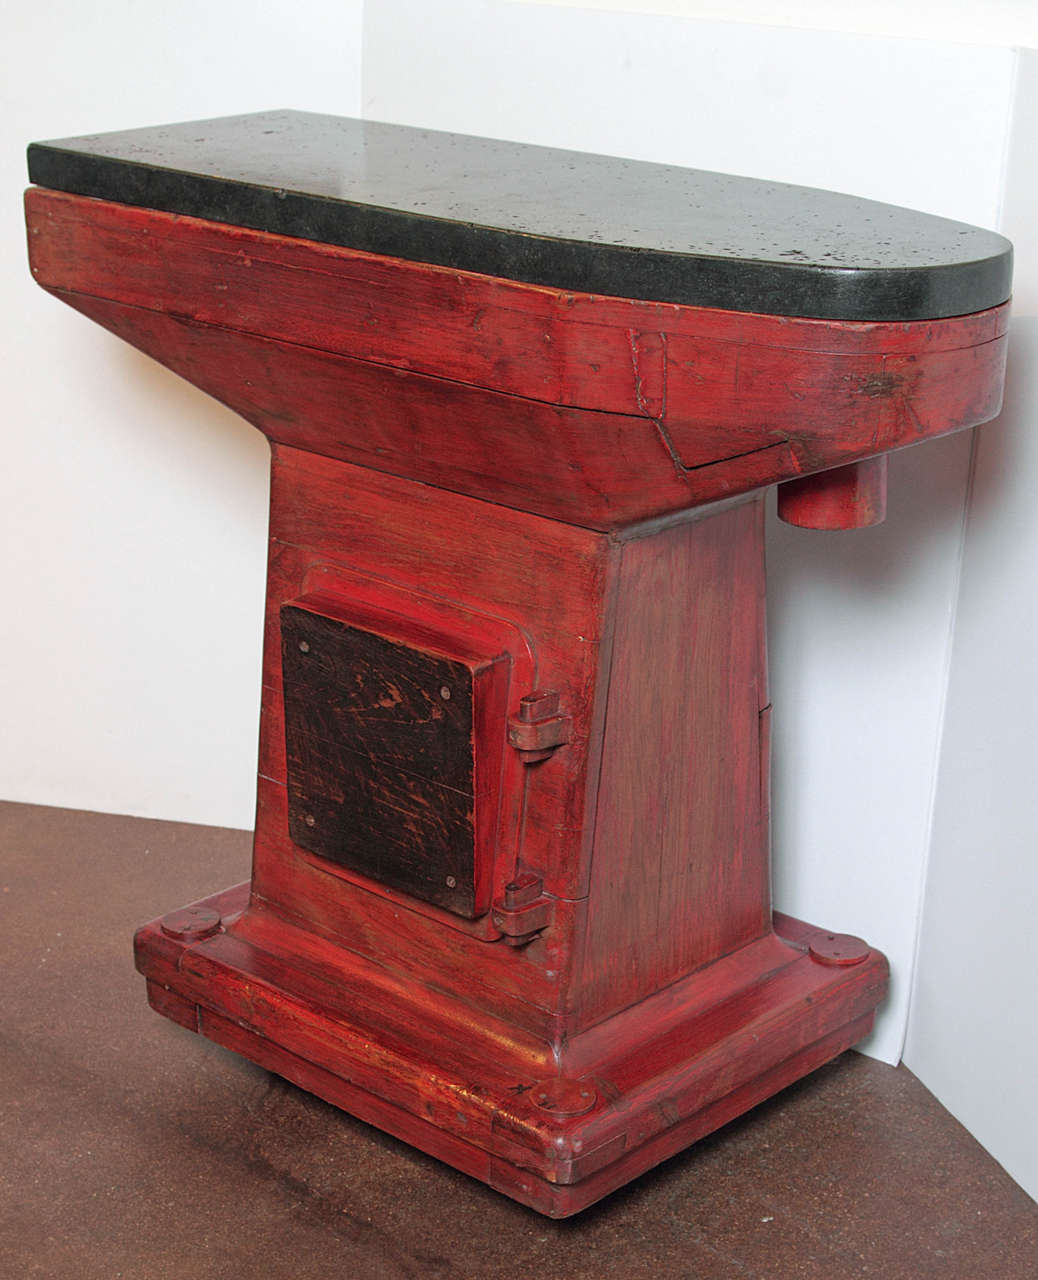 Vintage Industrial factory mould as console table
Unique console, repurposed from an industry factory mould used to make factory gears. Original red paint patina with custom 2” thick limestone top, found in Flanders, which is known as the